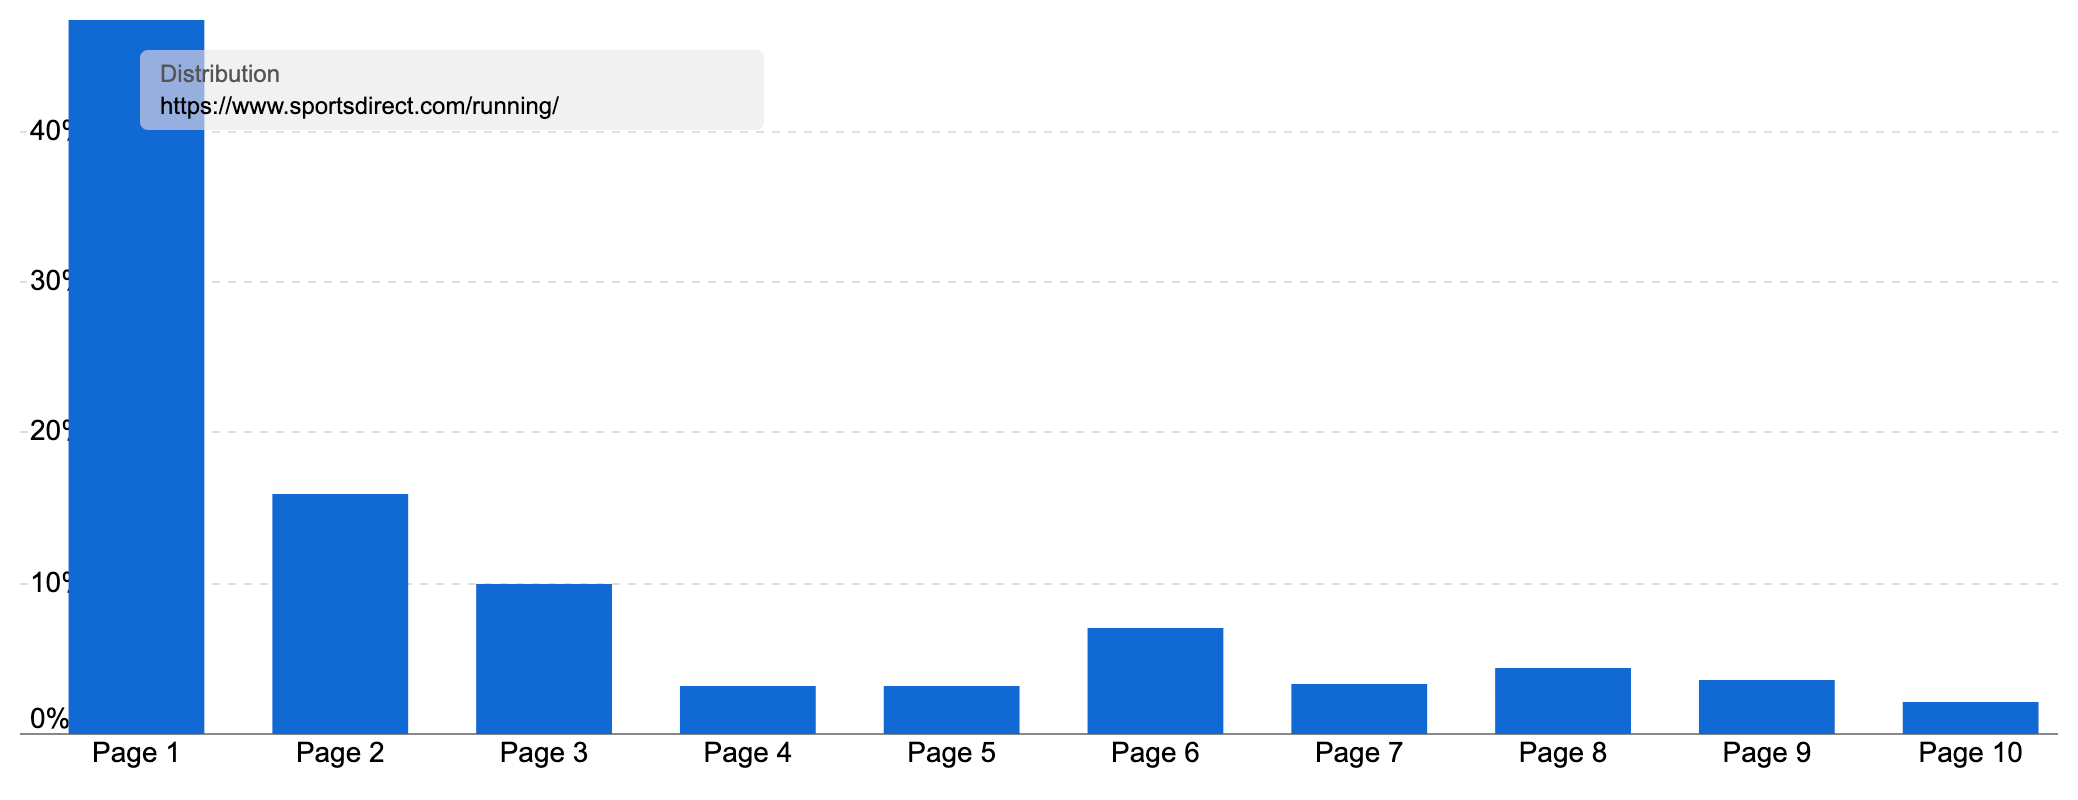 Graph with ranking keywords of "running" category, most being on page one.